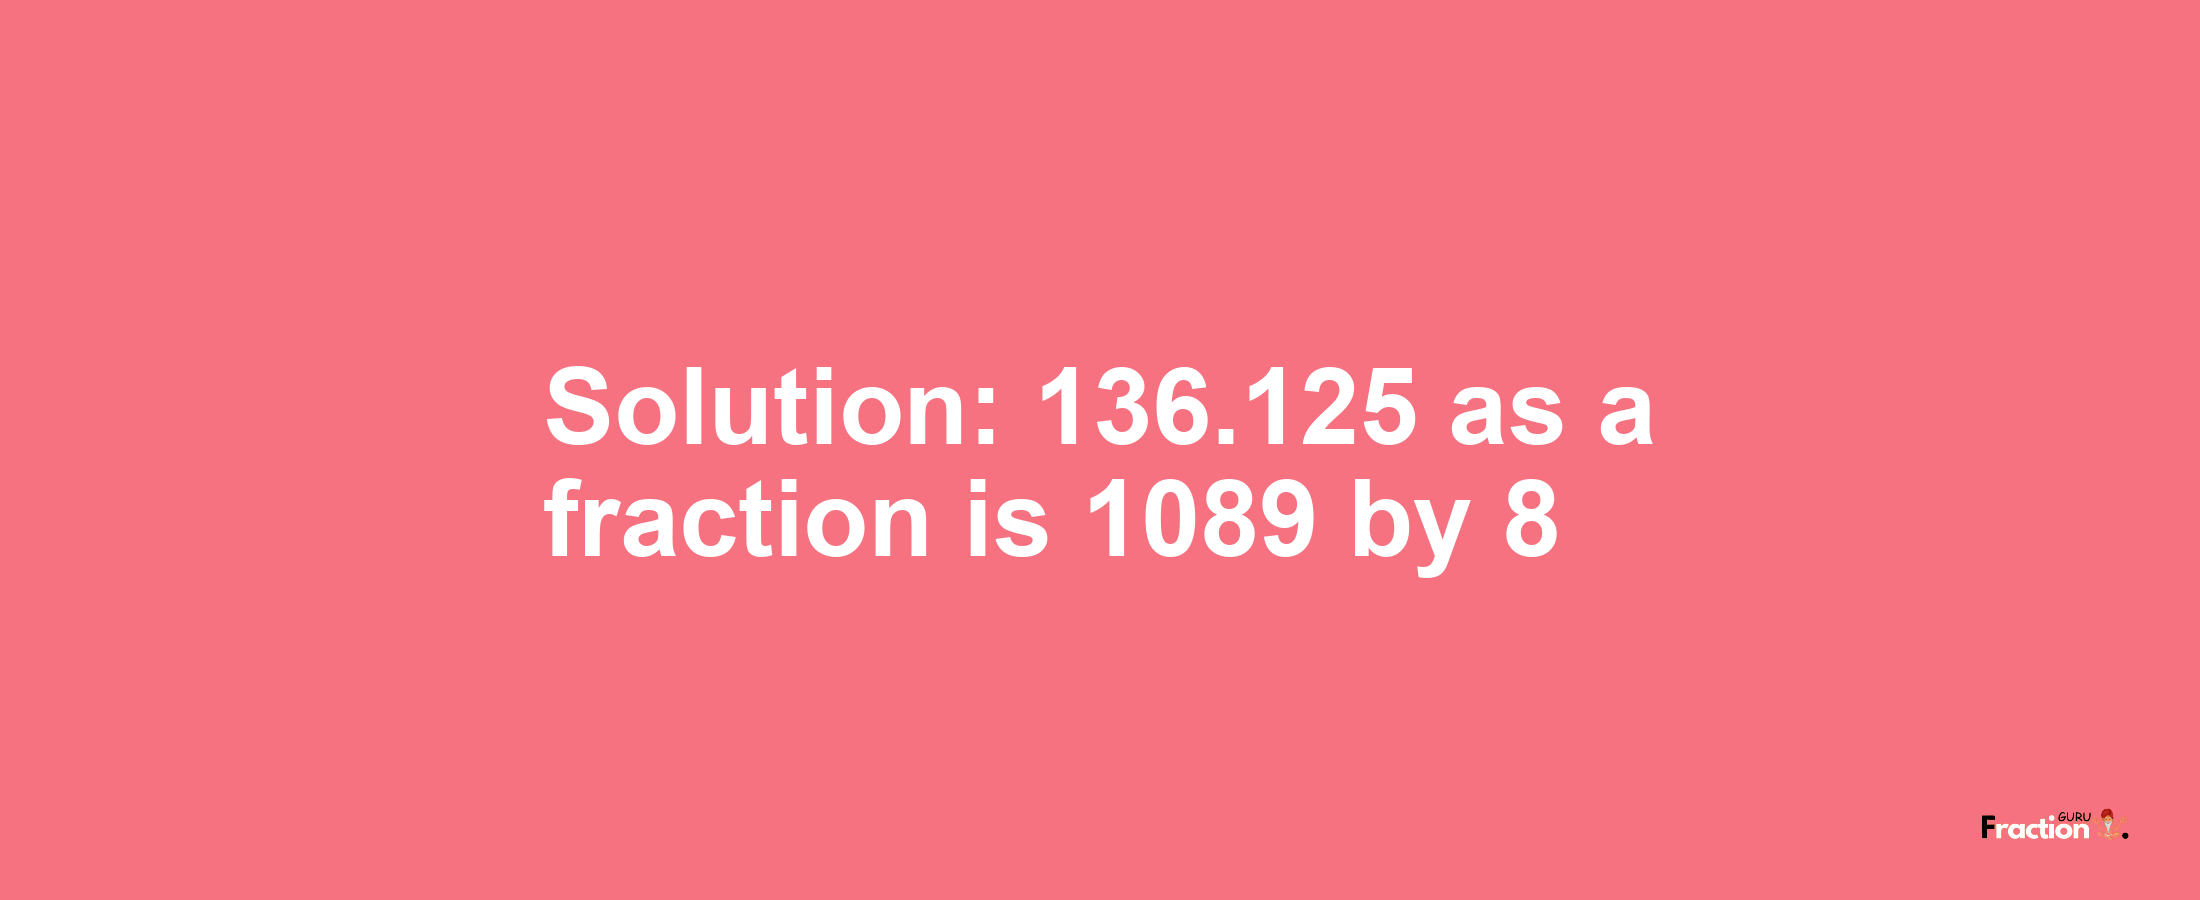 Solution:136.125 as a fraction is 1089/8